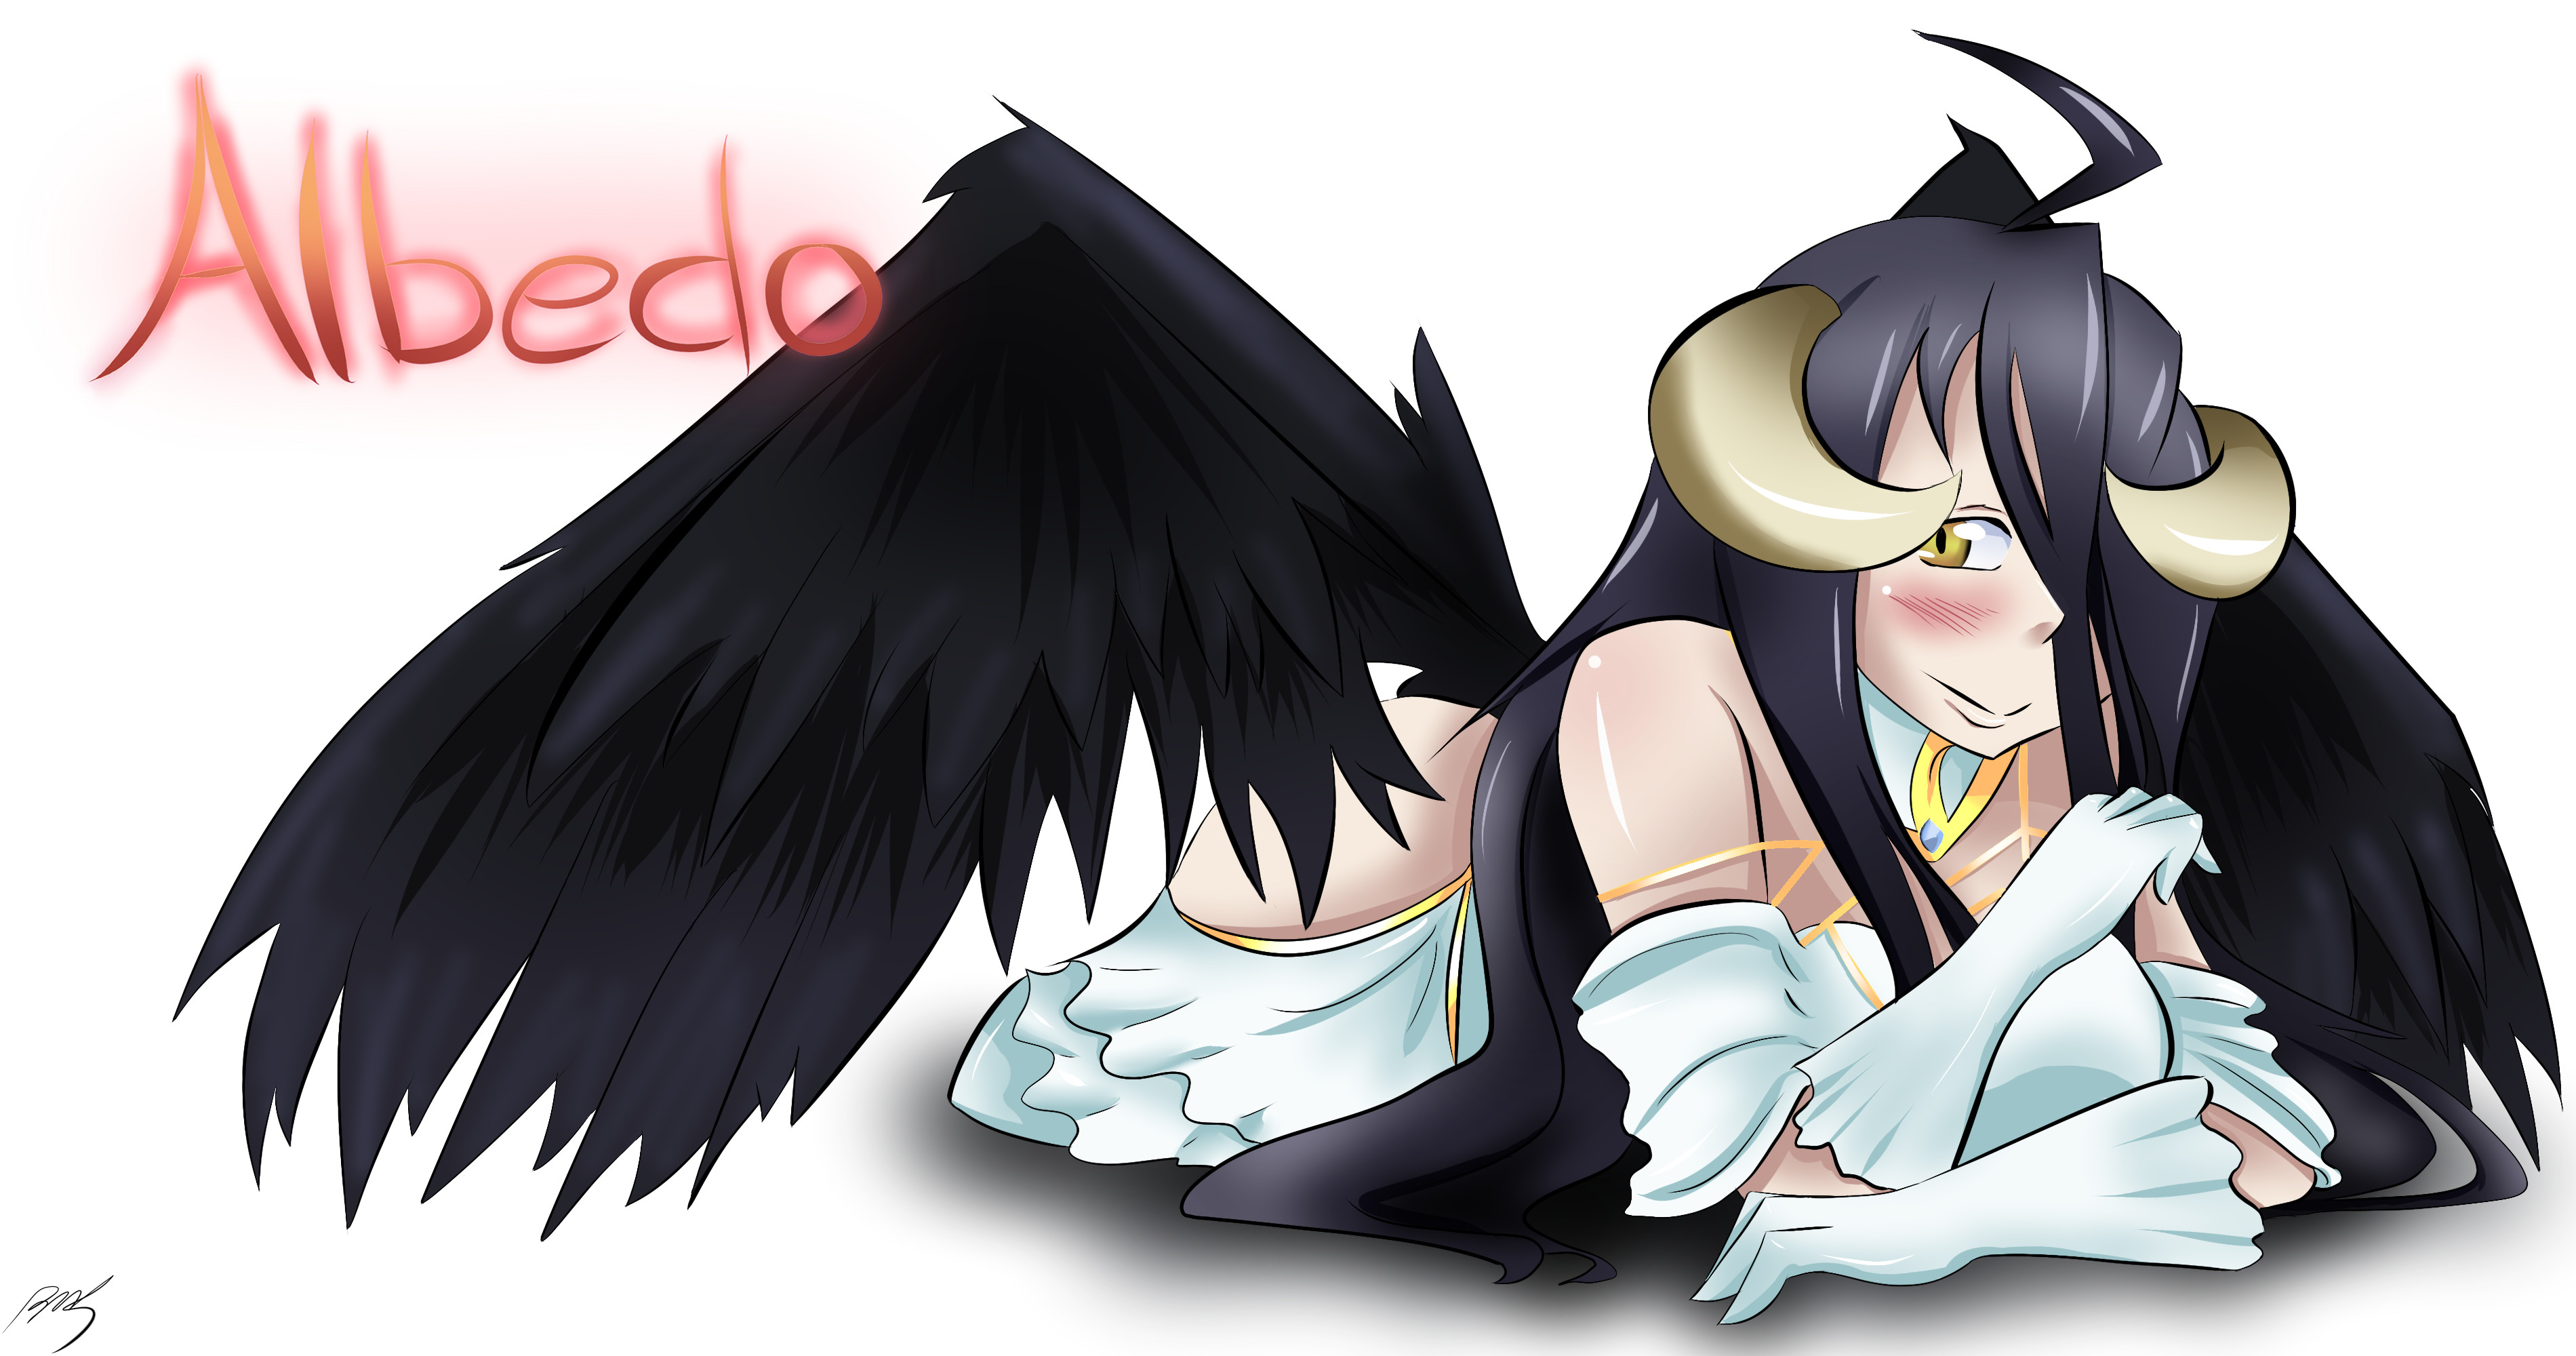 3800x2000 Overlord: Albedo by PaintedHooves Overlord: Albedo by PaintedHooves